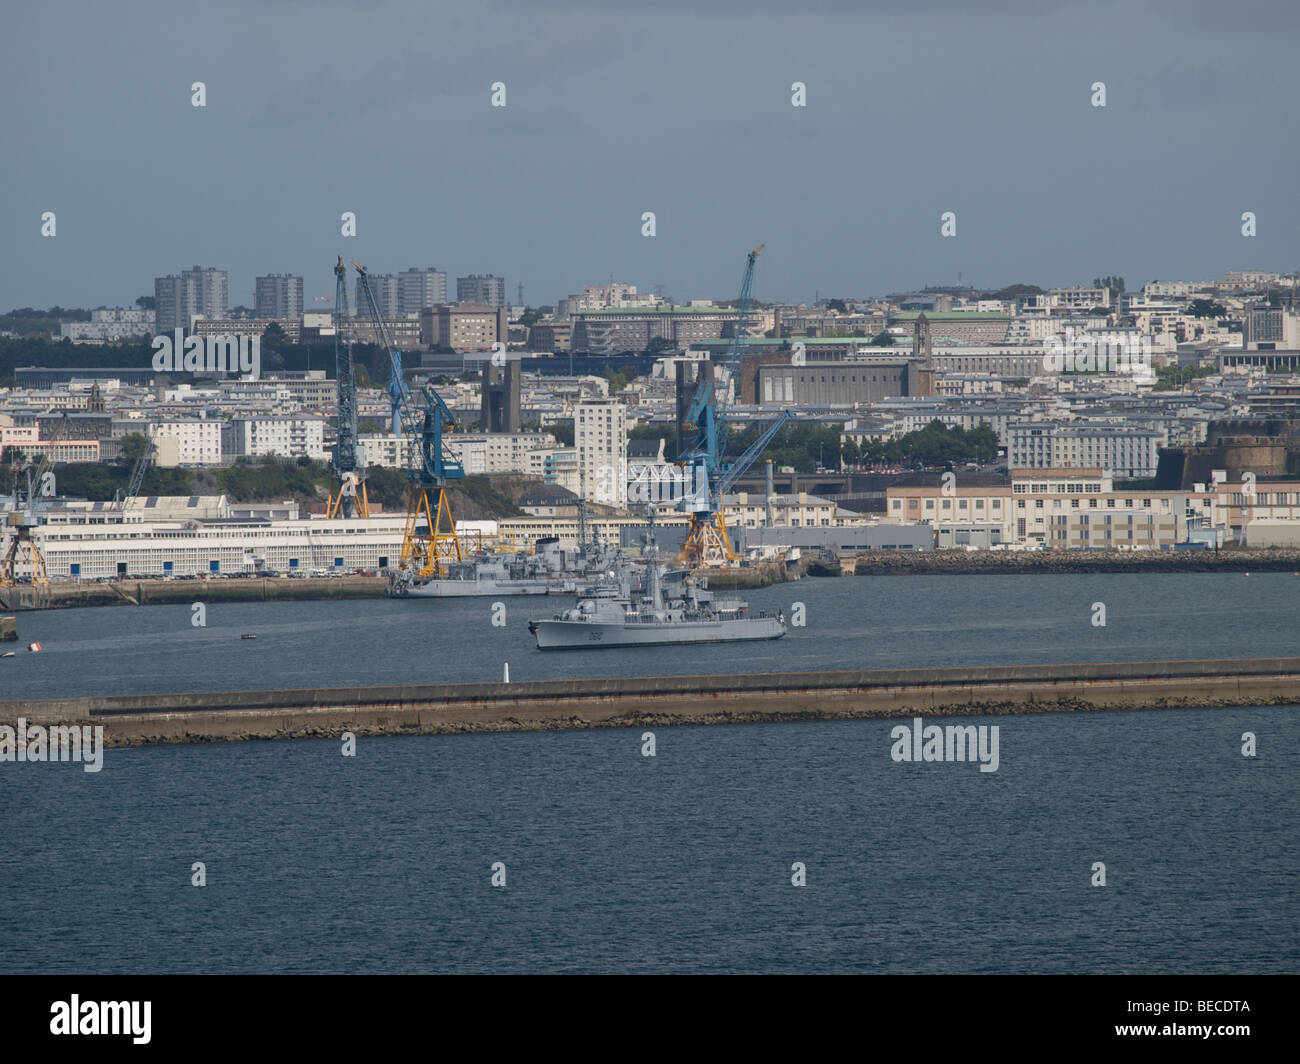 The French city of Brest has a large navy base, strategically placed on the  Atlantic Ocean coast. Brest, Brittany, France Stock Photo - Alamy